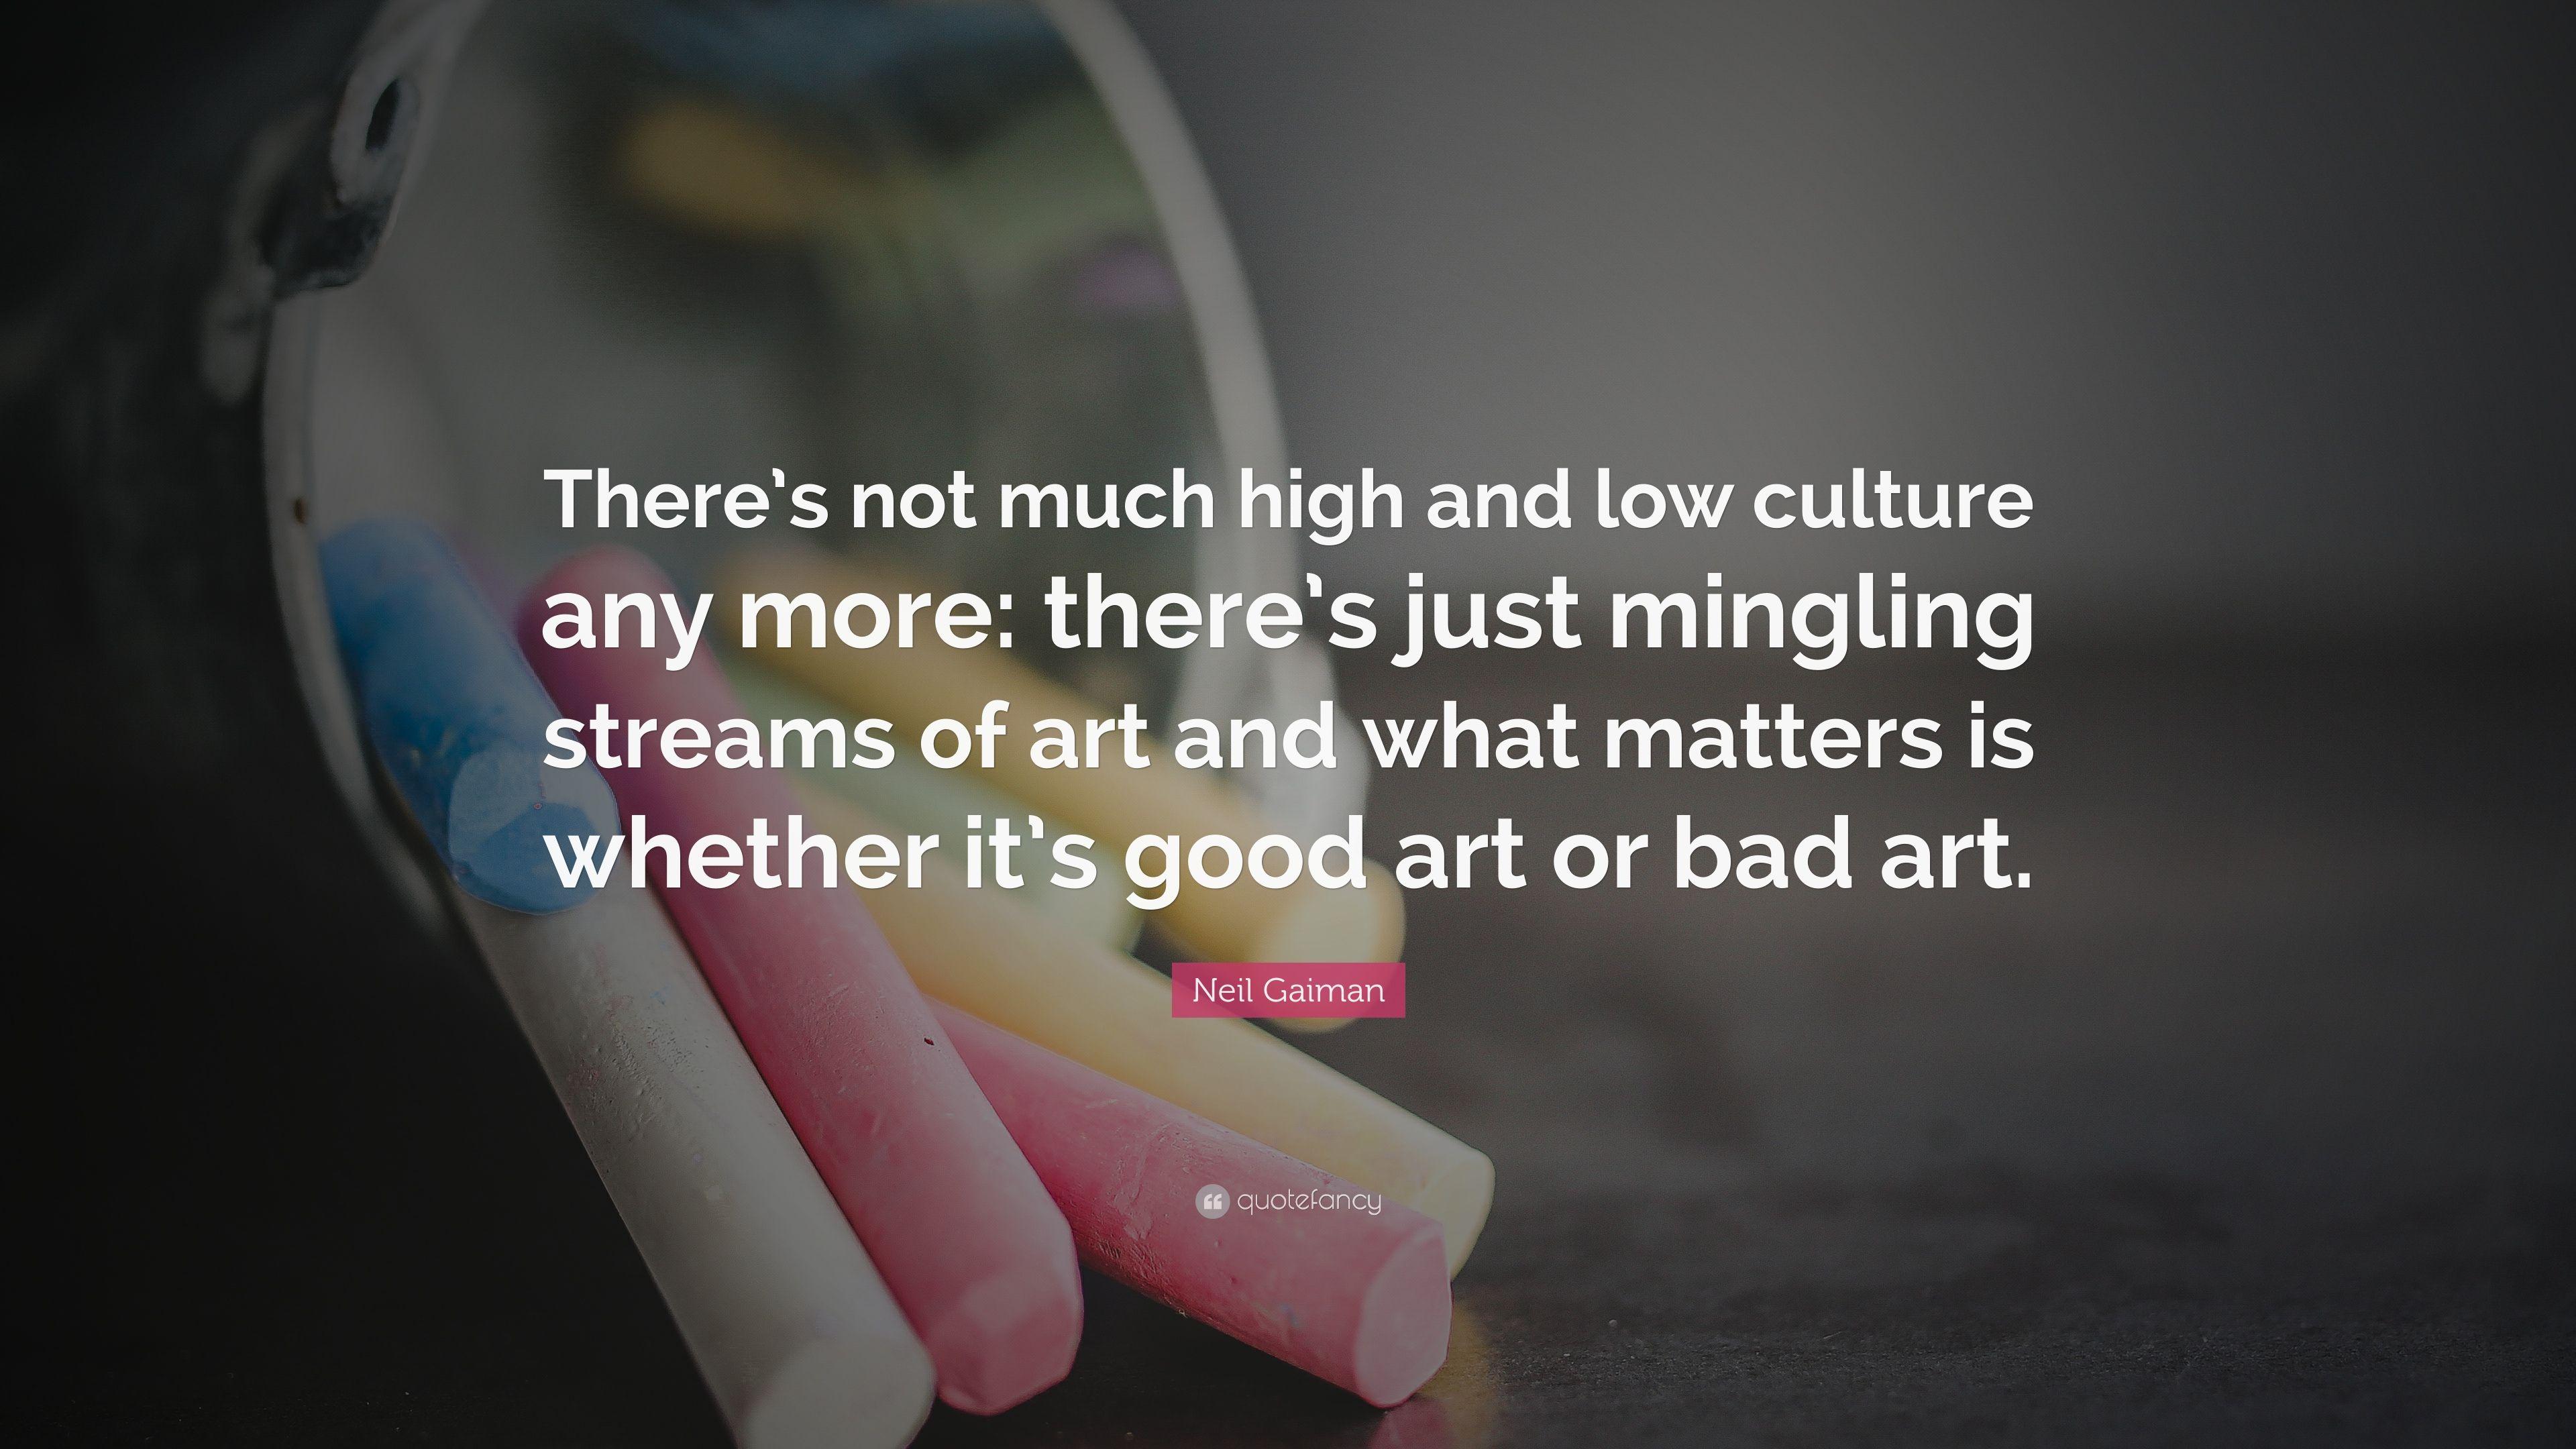 Neil Gaiman Quote: “There's not much high and low culture any more